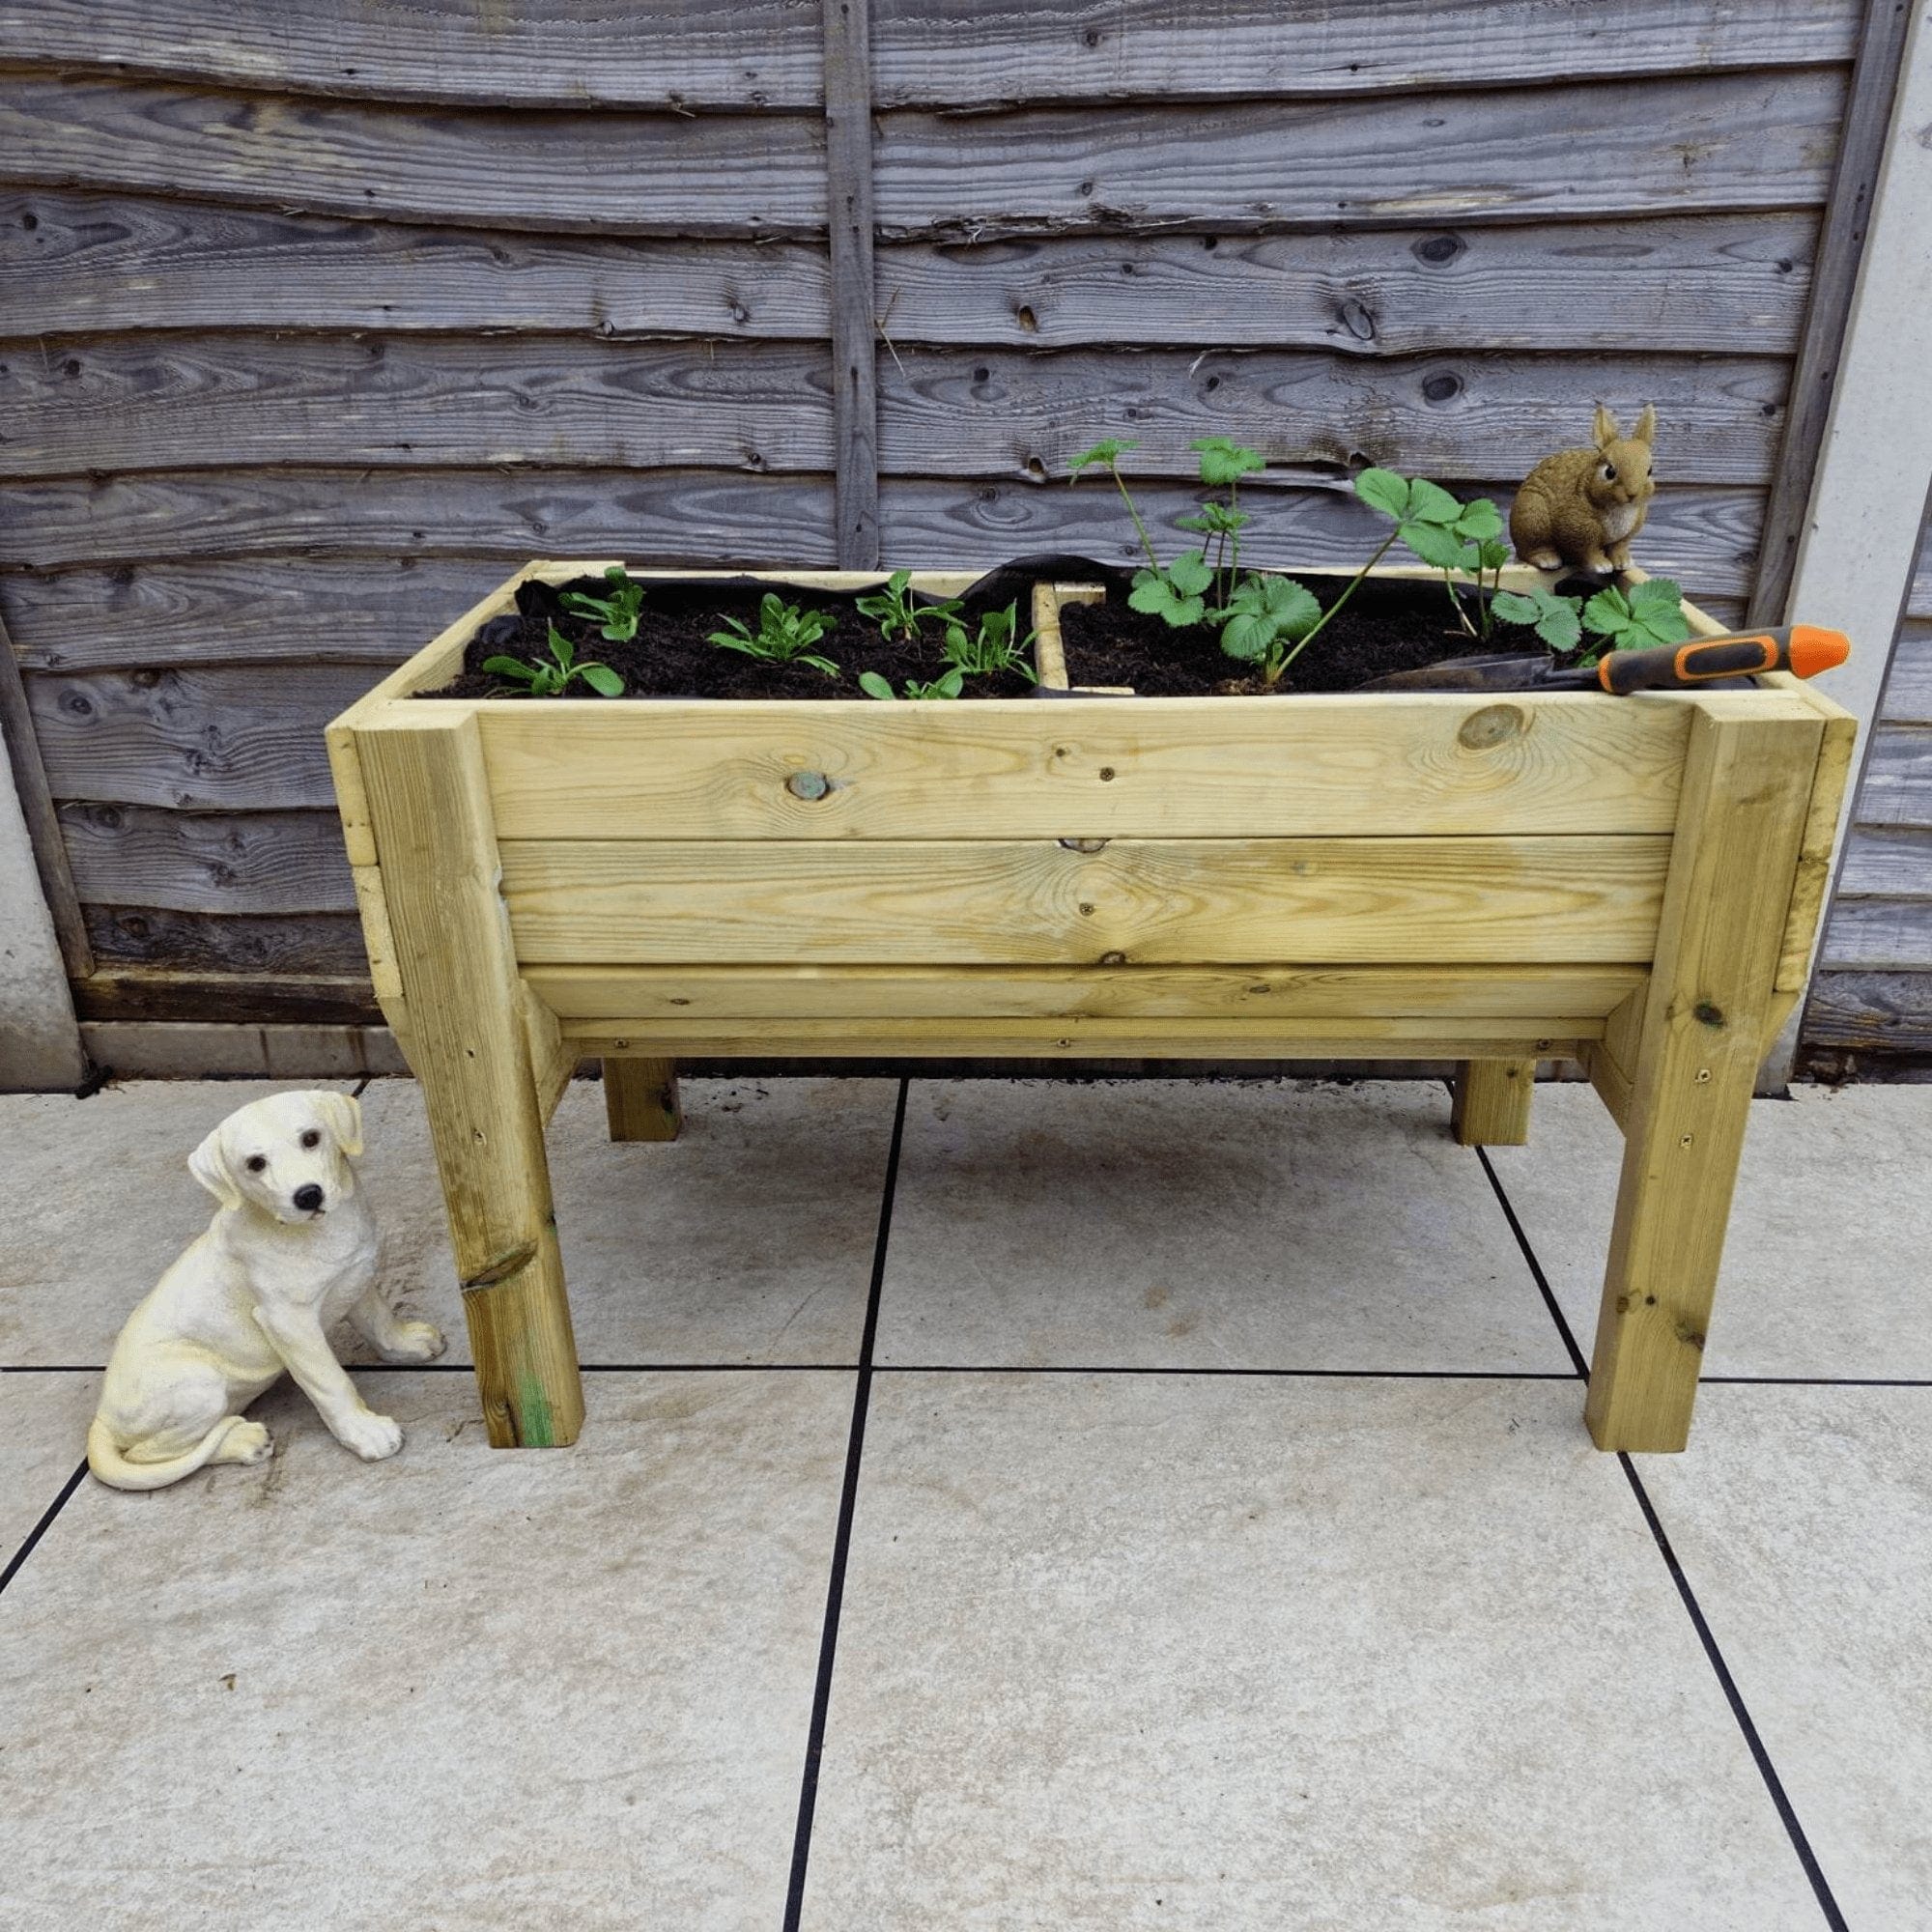 Veg Trug offering a convenient and stylish solution for growing vegetables.